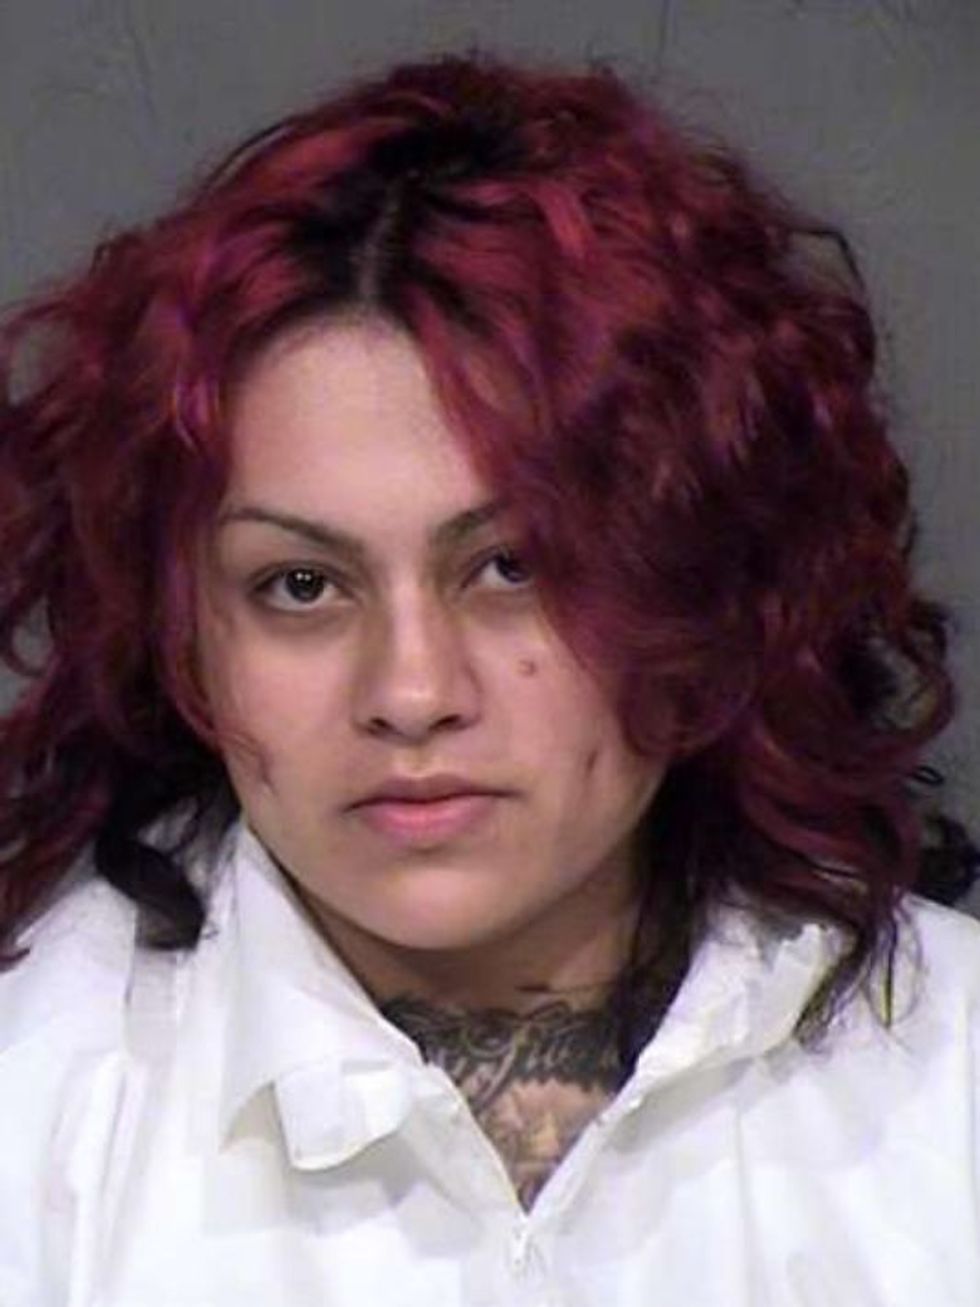 Mom Tells Cops She Drowned Kids in Bathtub Because Nobody Loved Them